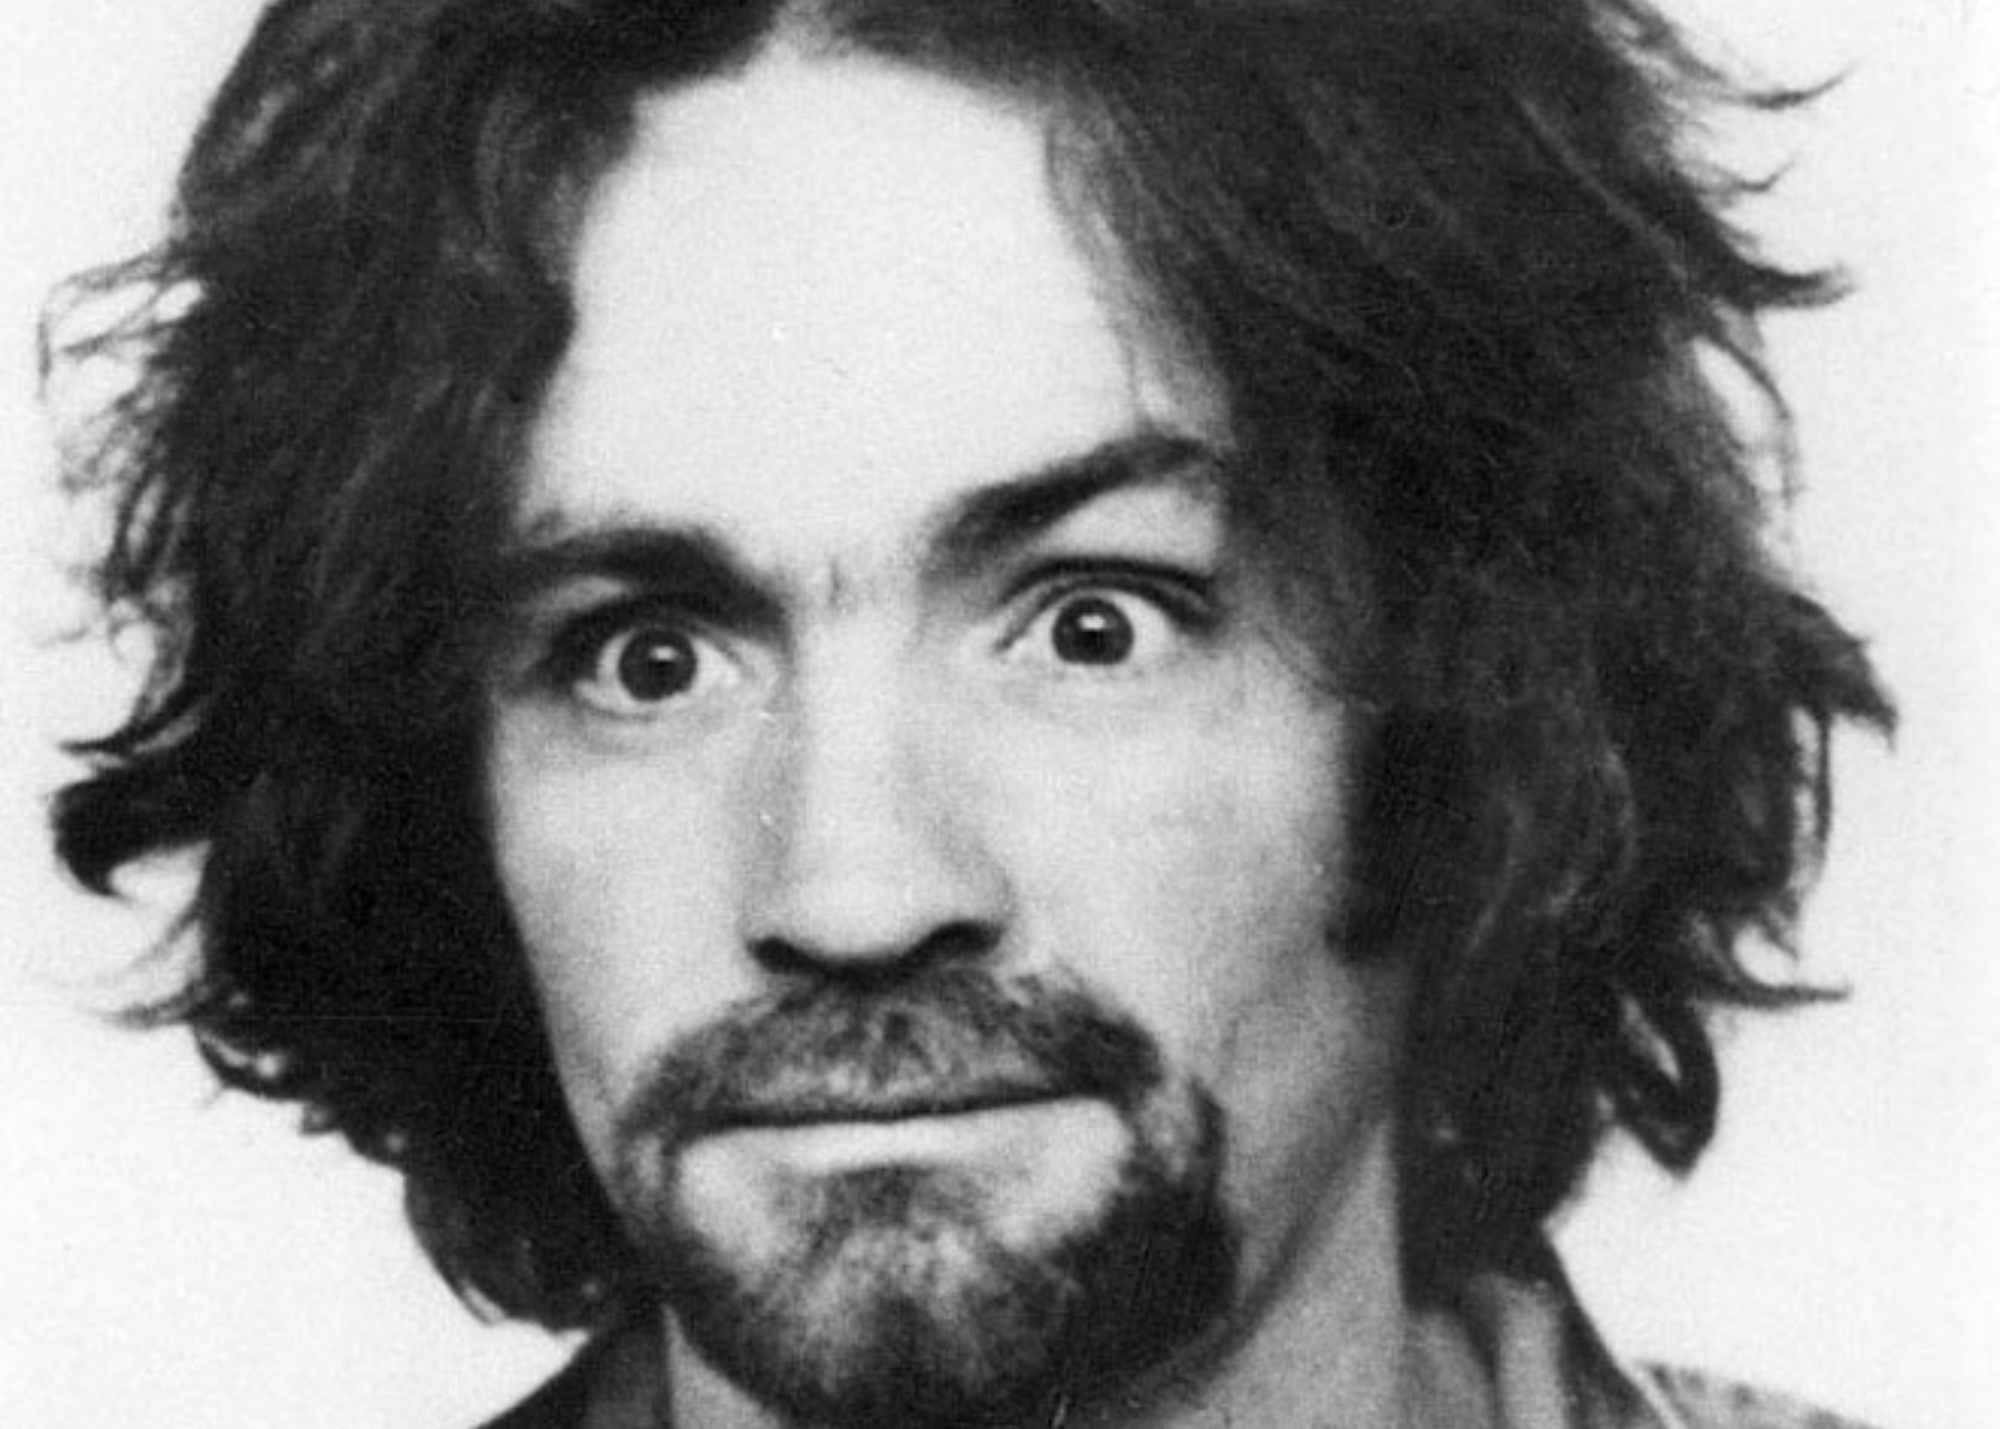 A grayscale picture of Charles Manson with his eyes wide open